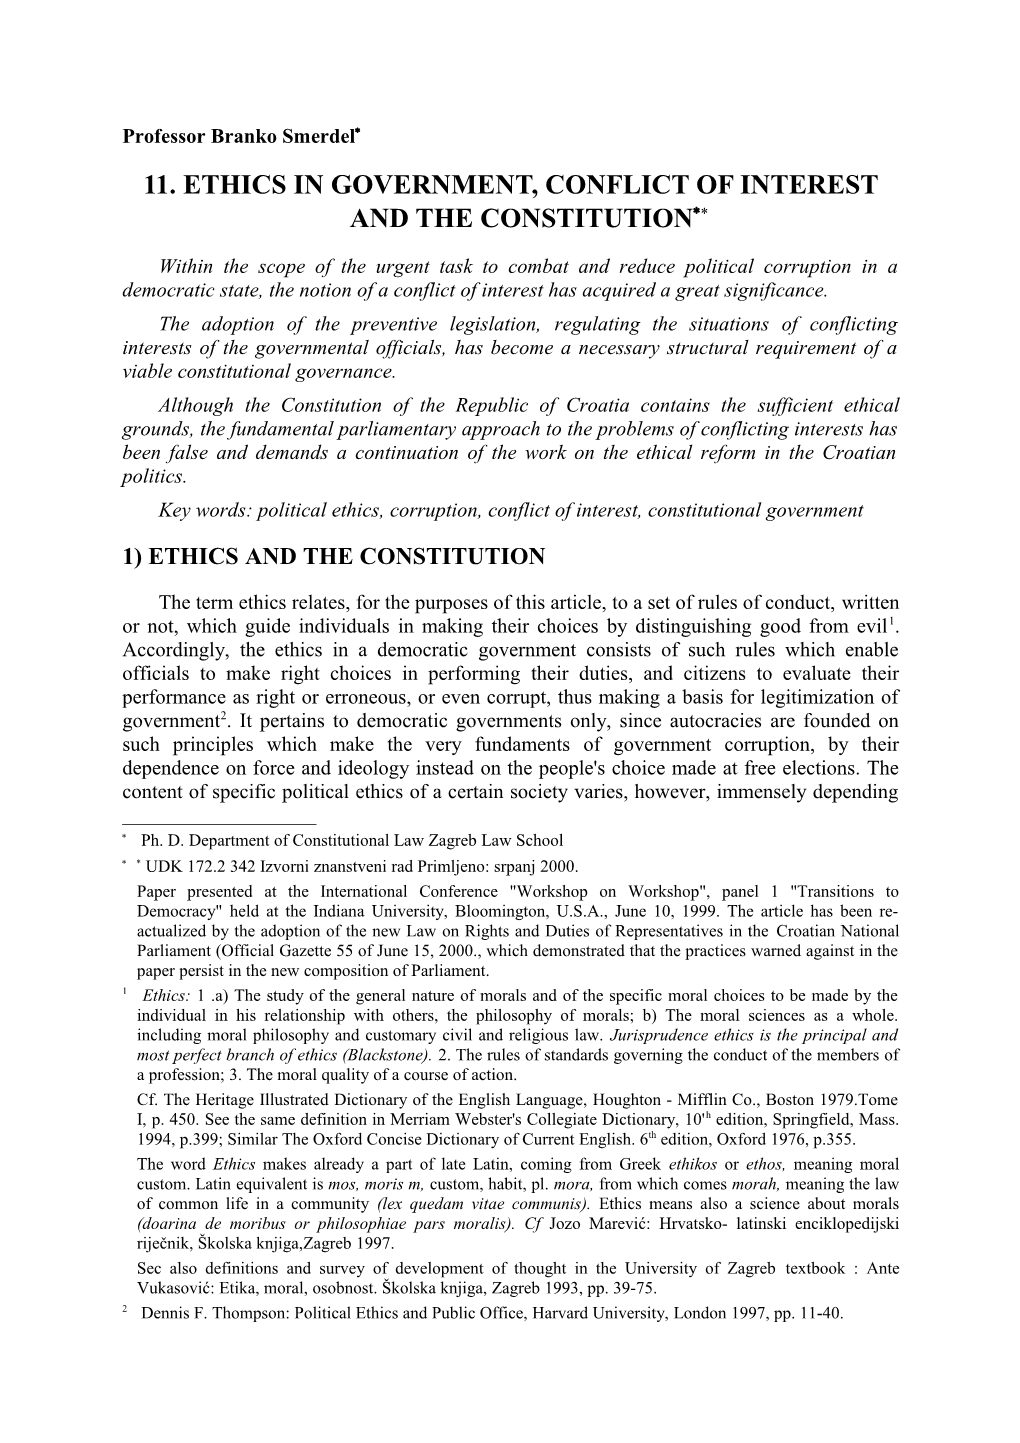 11. ETHICS in GOVERNMENT, Conflict of Interest and the Constitution